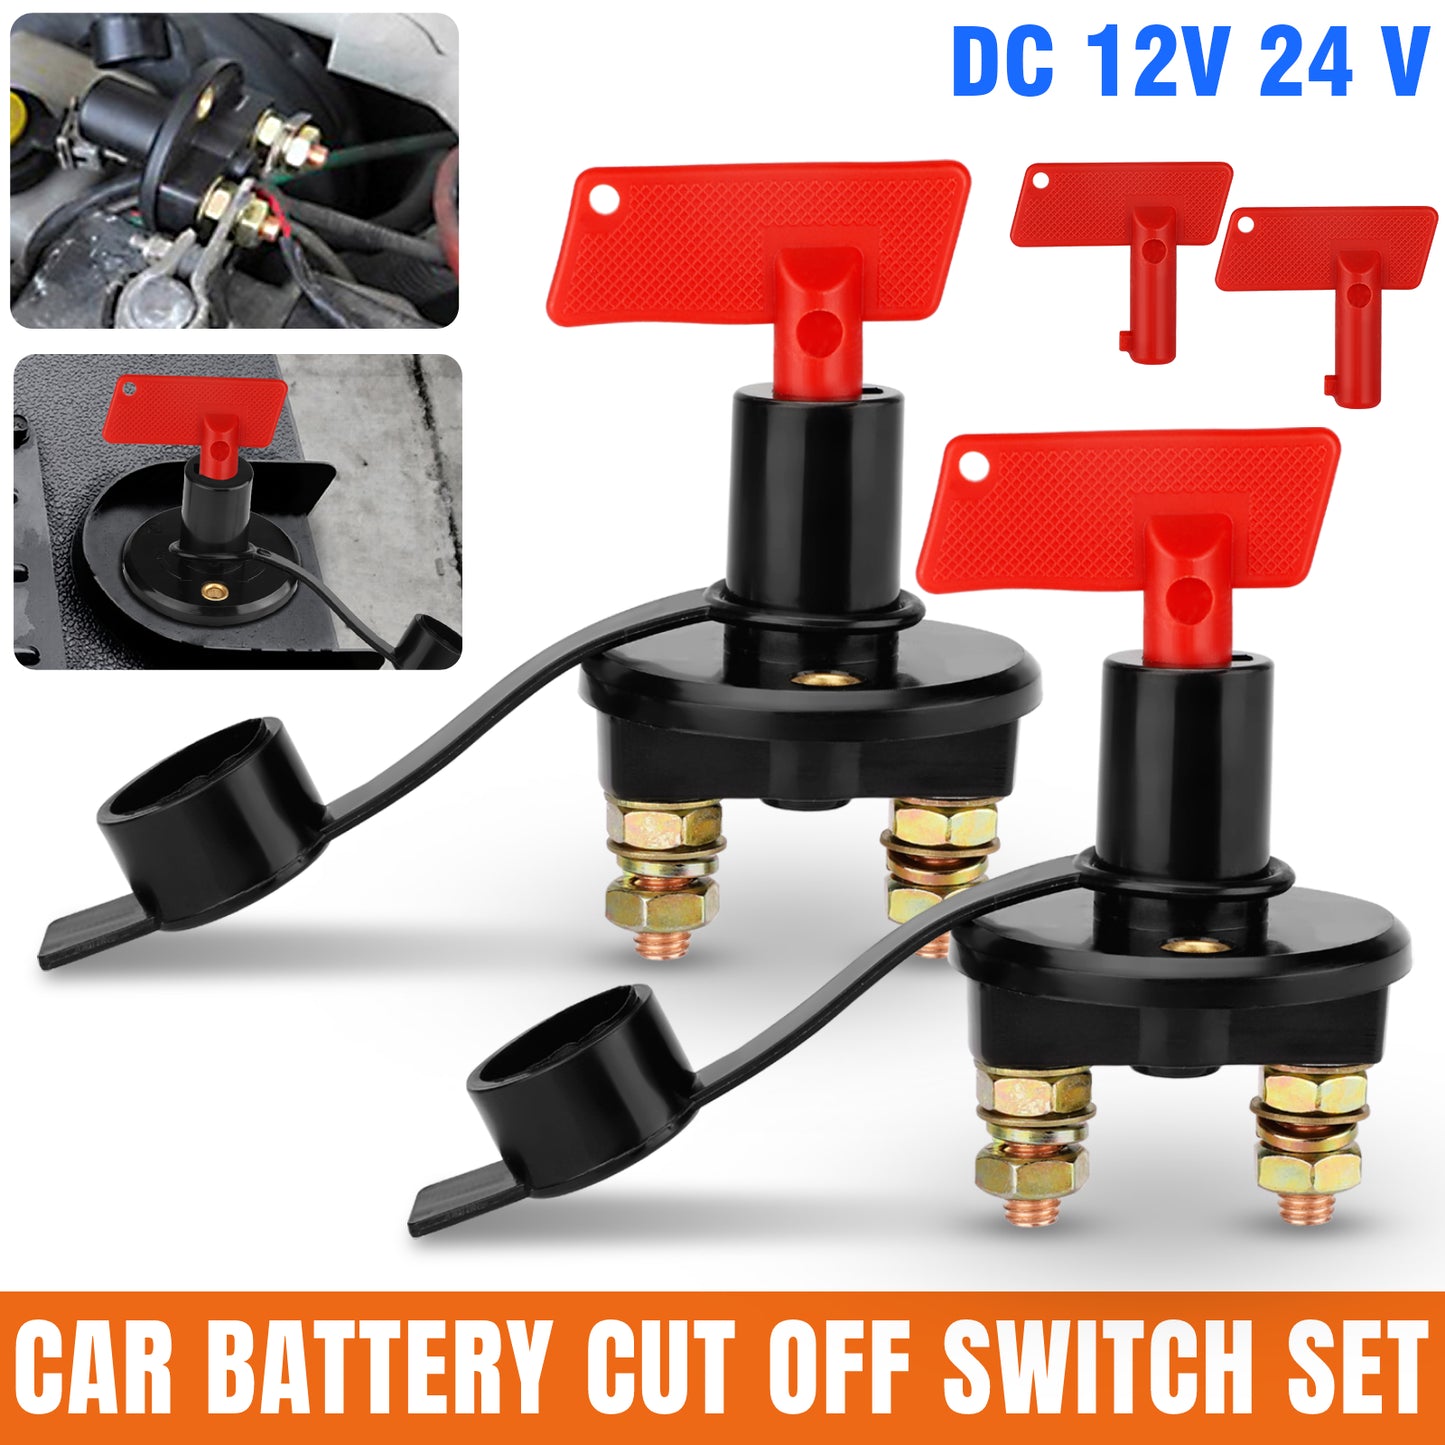 2 pcs 12V/24V Car Battery Cut Off Switch Set - Key-Controlled Isolator for Auto, Boat, Truck, Marine, RV - Protect Your Vehicle Anytime, Anywhere